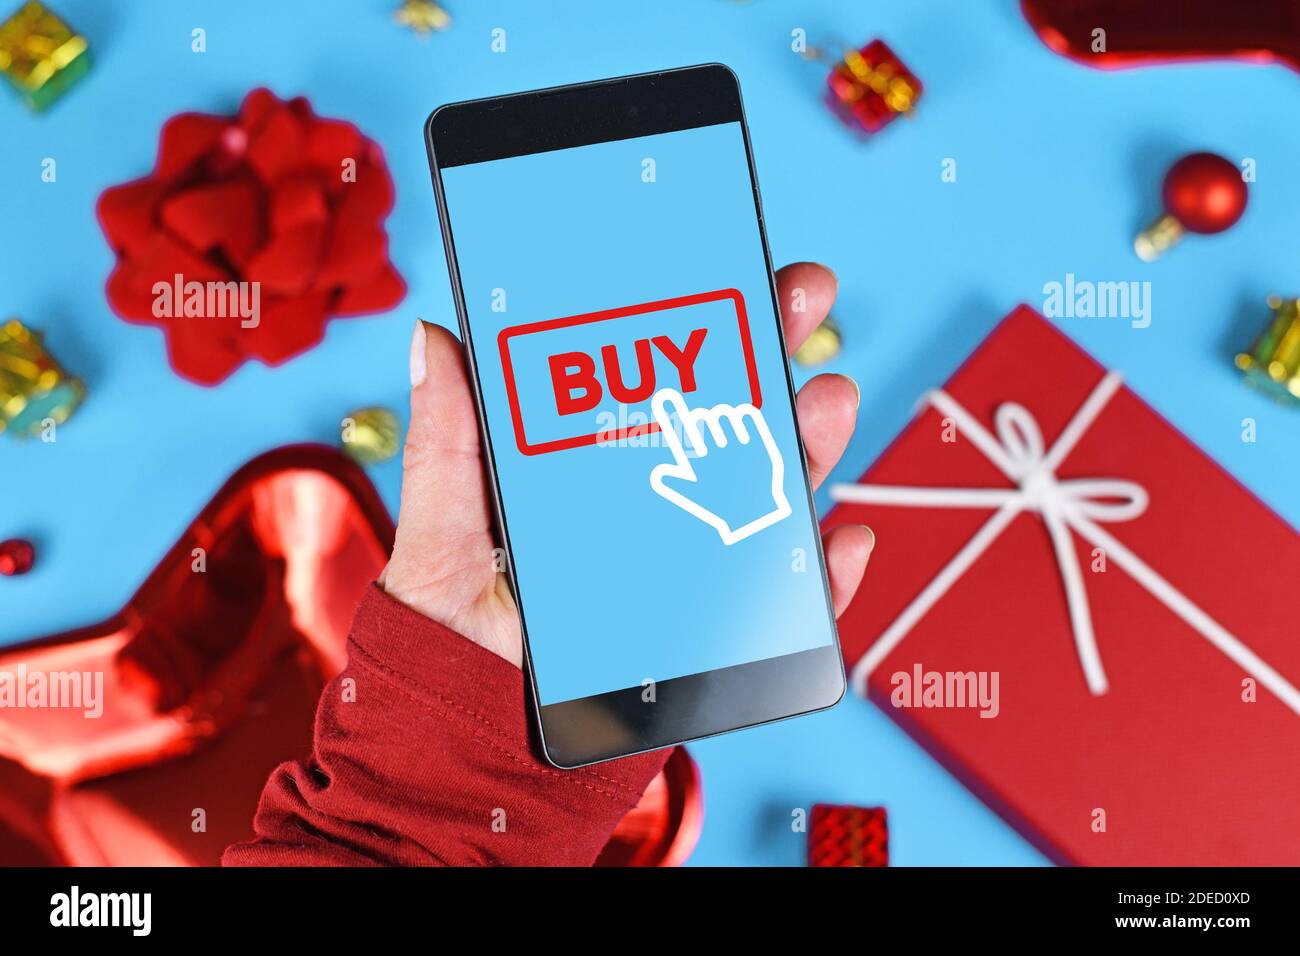 Christmas online shopping and sales concept with hand holding cell phone with 'Buy' click button sign in front of seasonal decorations Stock Photo